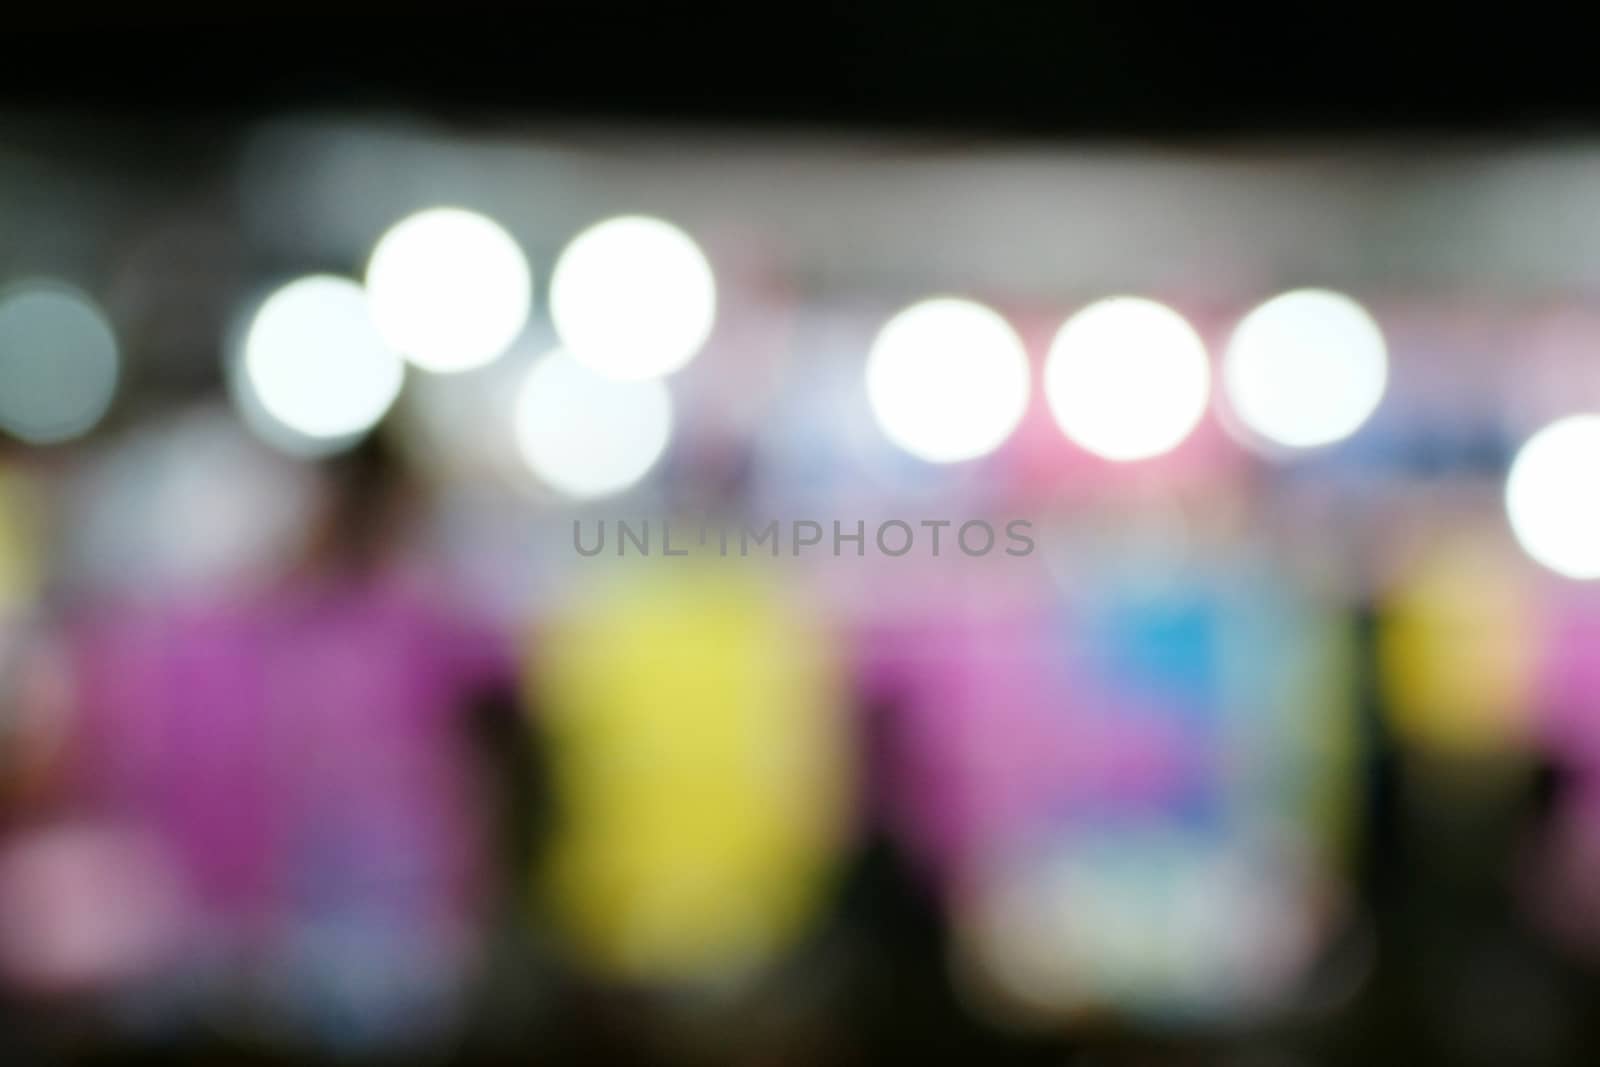 Defocused and blurred image of people at amusement park at night for background usage. by mranucha